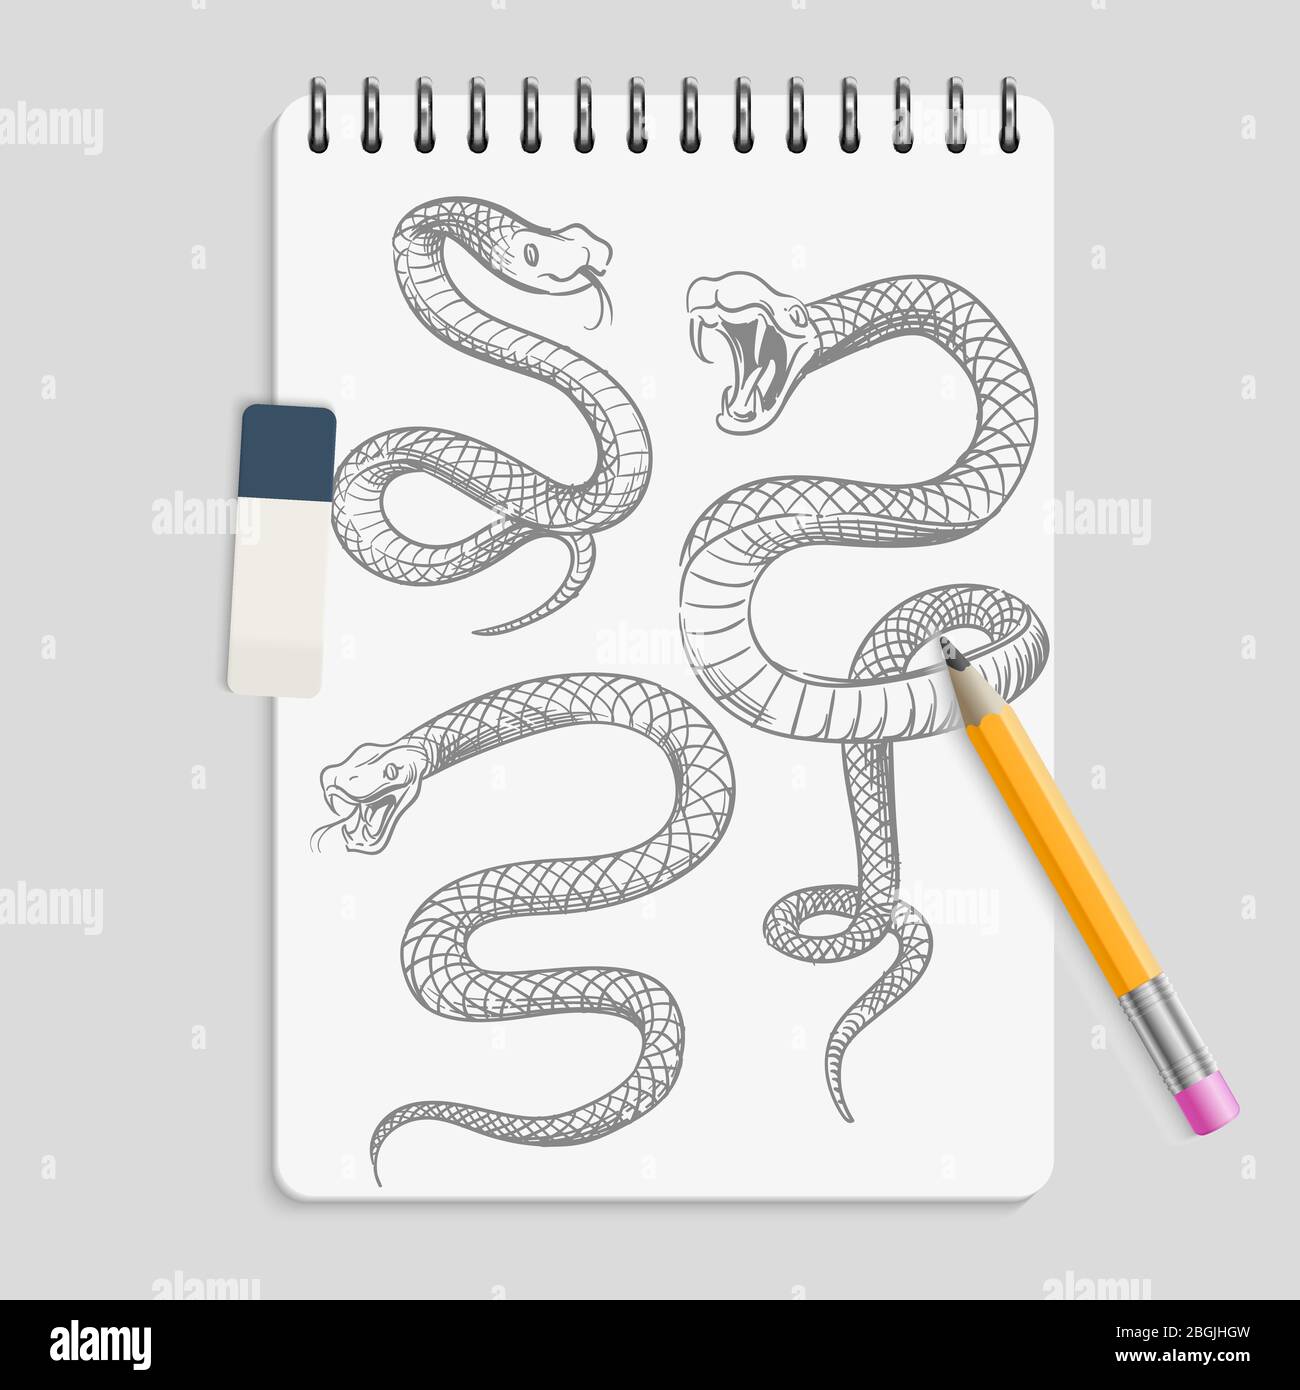 Hand drawn snakes on realisic notebook page with pencil and eraser. Animal serpent tattoo sketch, reptile drawing viper, vector illustration Stock Vector